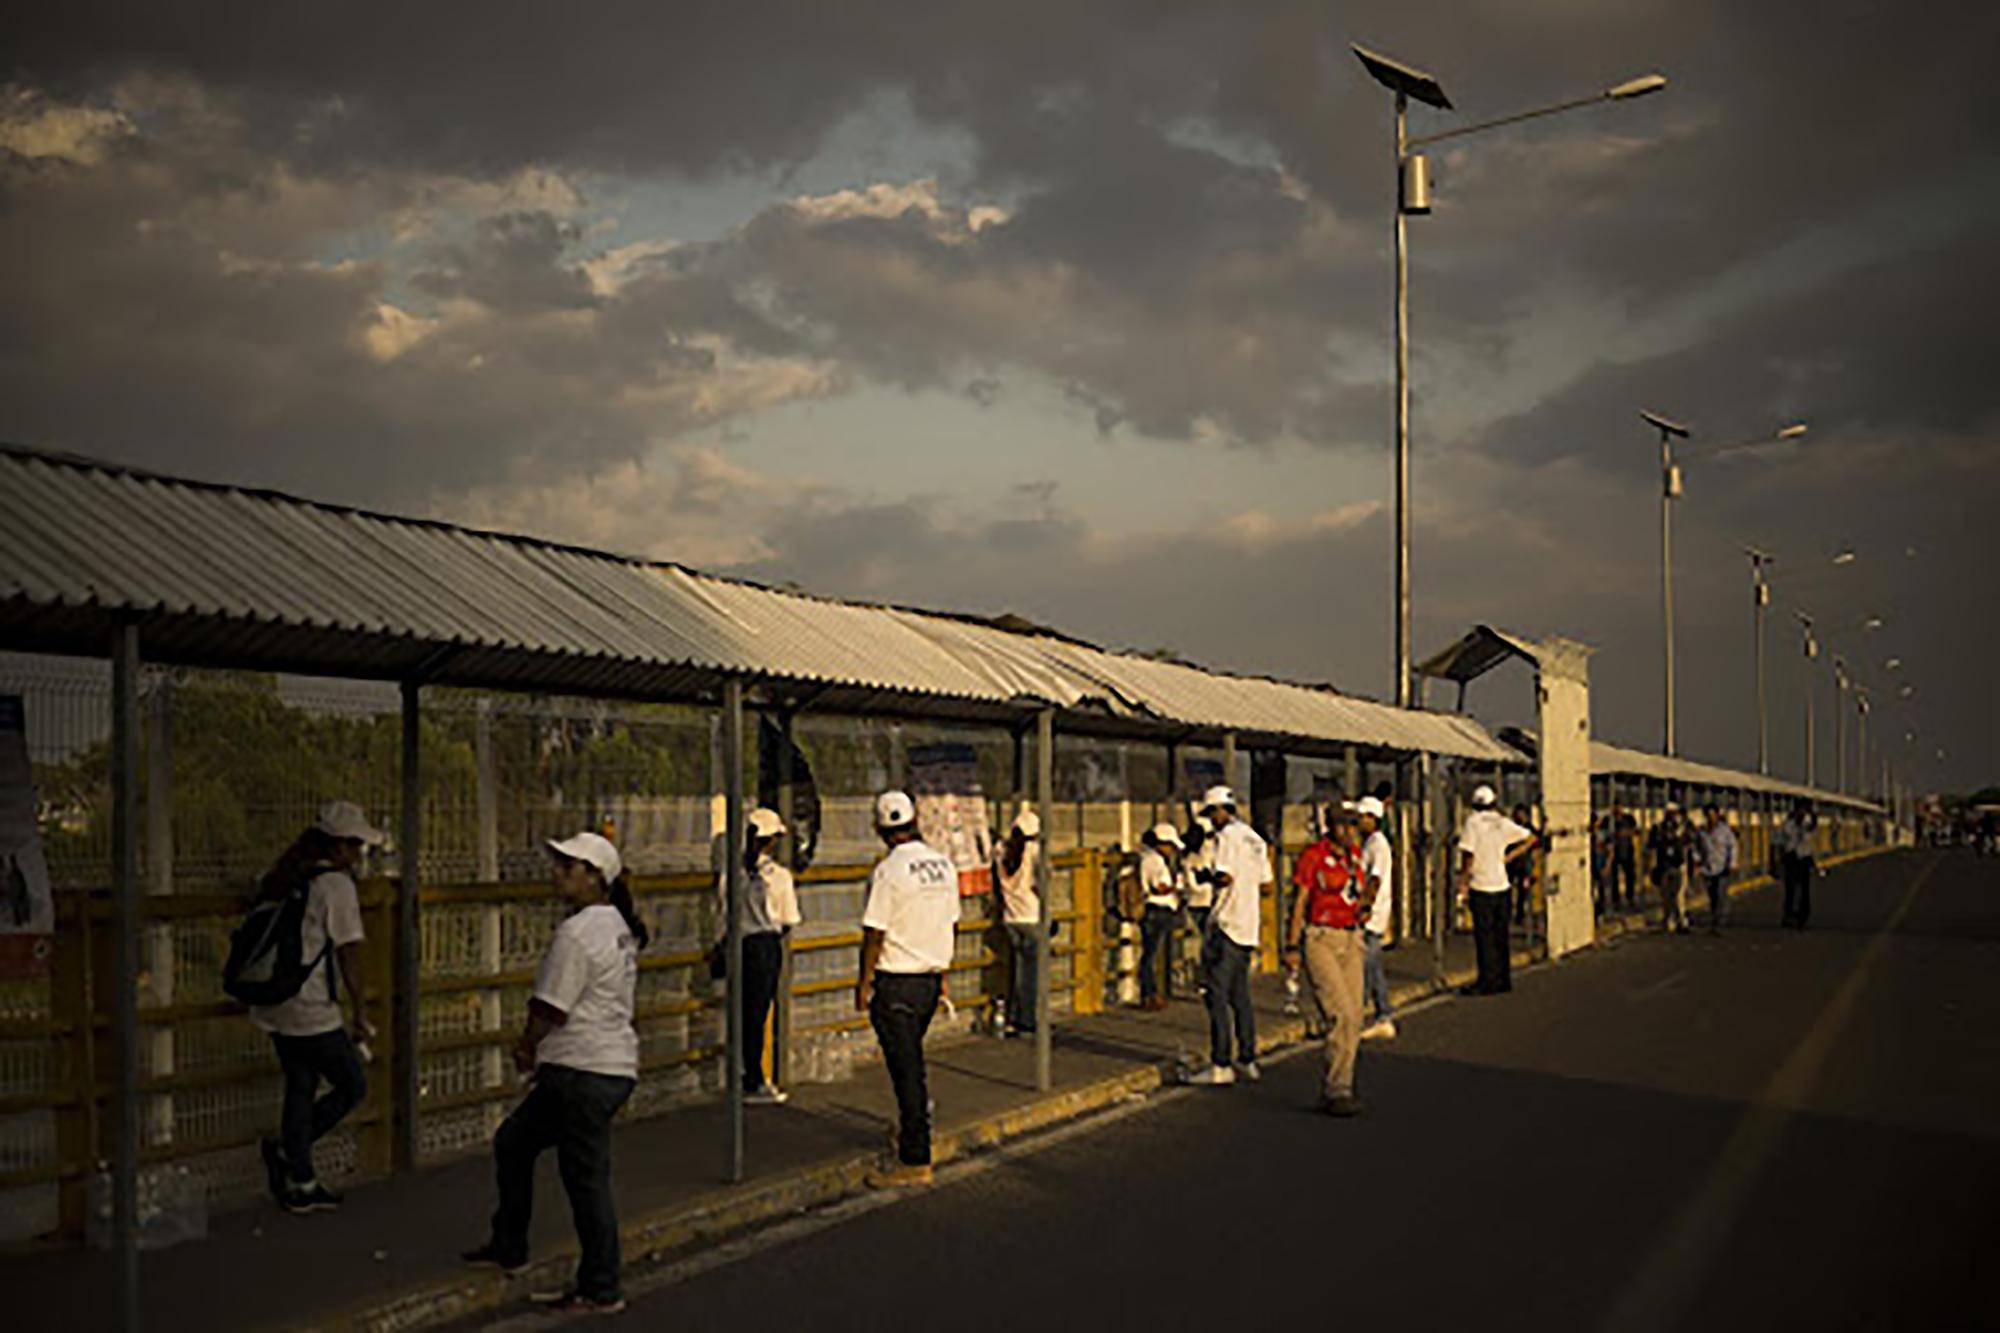 Team members from Mexico’s National Immigration Institute (INM) stand along the pedestrian path on the Rodolfo Robles bridge, which crosses the Suchiate River that divides Guatemala and Mexico. Since January 17, 2019, Mexico has opened its doors to Central Americans fleeing their home countries, offering them permits to travel and work freely in Mexican territory for up to one year.